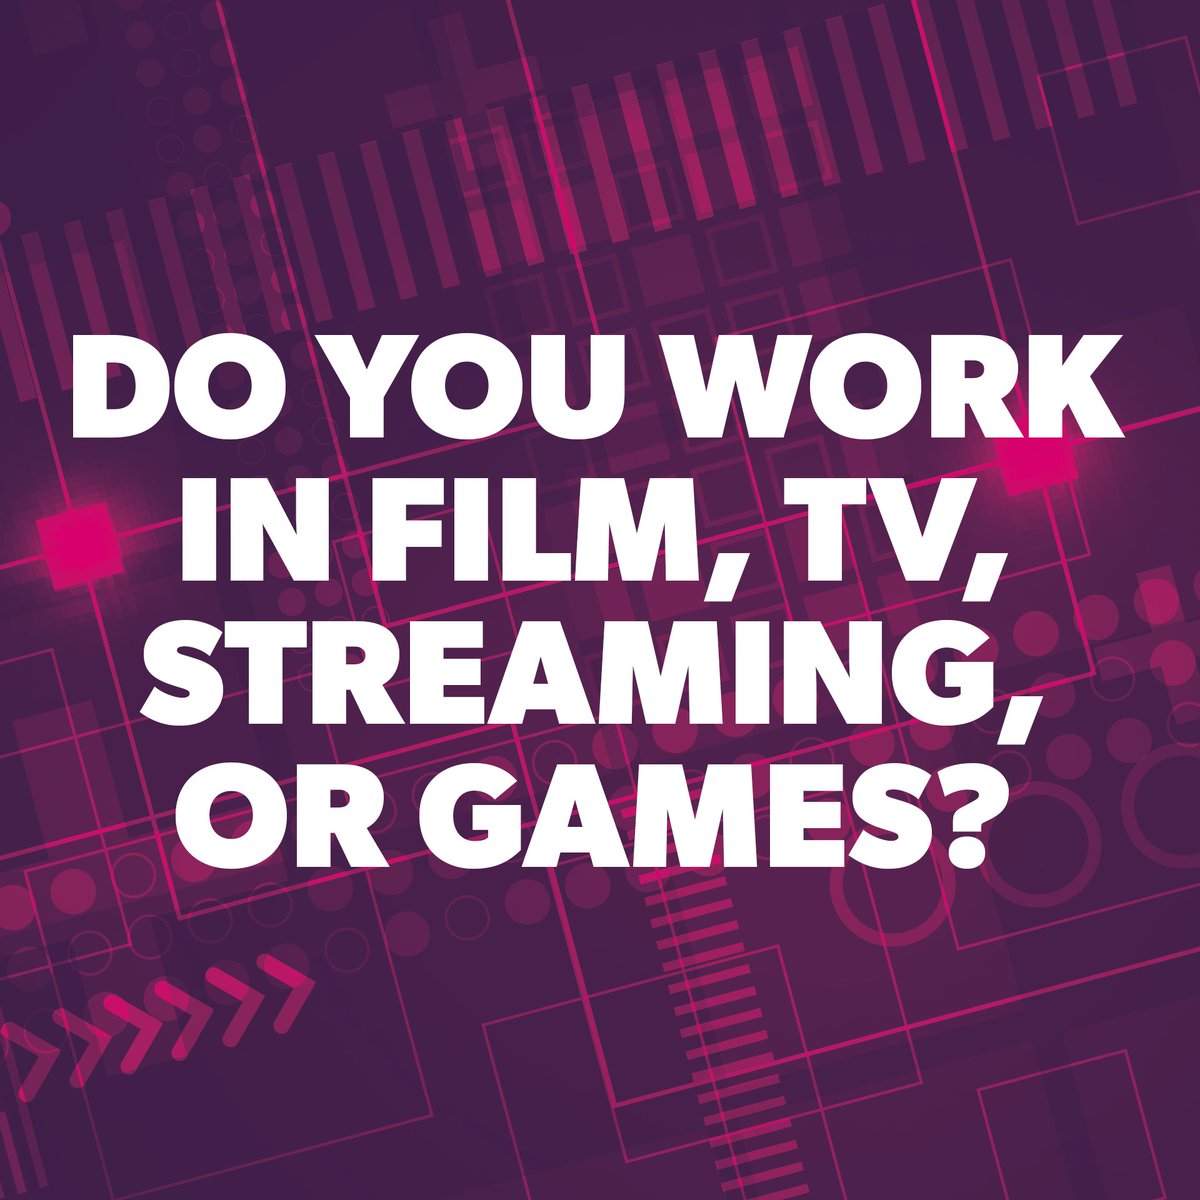 Do you work in film, TV, streaming, or games? Contribute to groundbreaking research on 2SLGBTQIA+ representation in Canada w/ @ptp_media, @CMF_FMC, & @Telefilm_Canada. Shape a more inclusive industry, by sharing your perspective in our survey → bit.ly/4cT0AZX